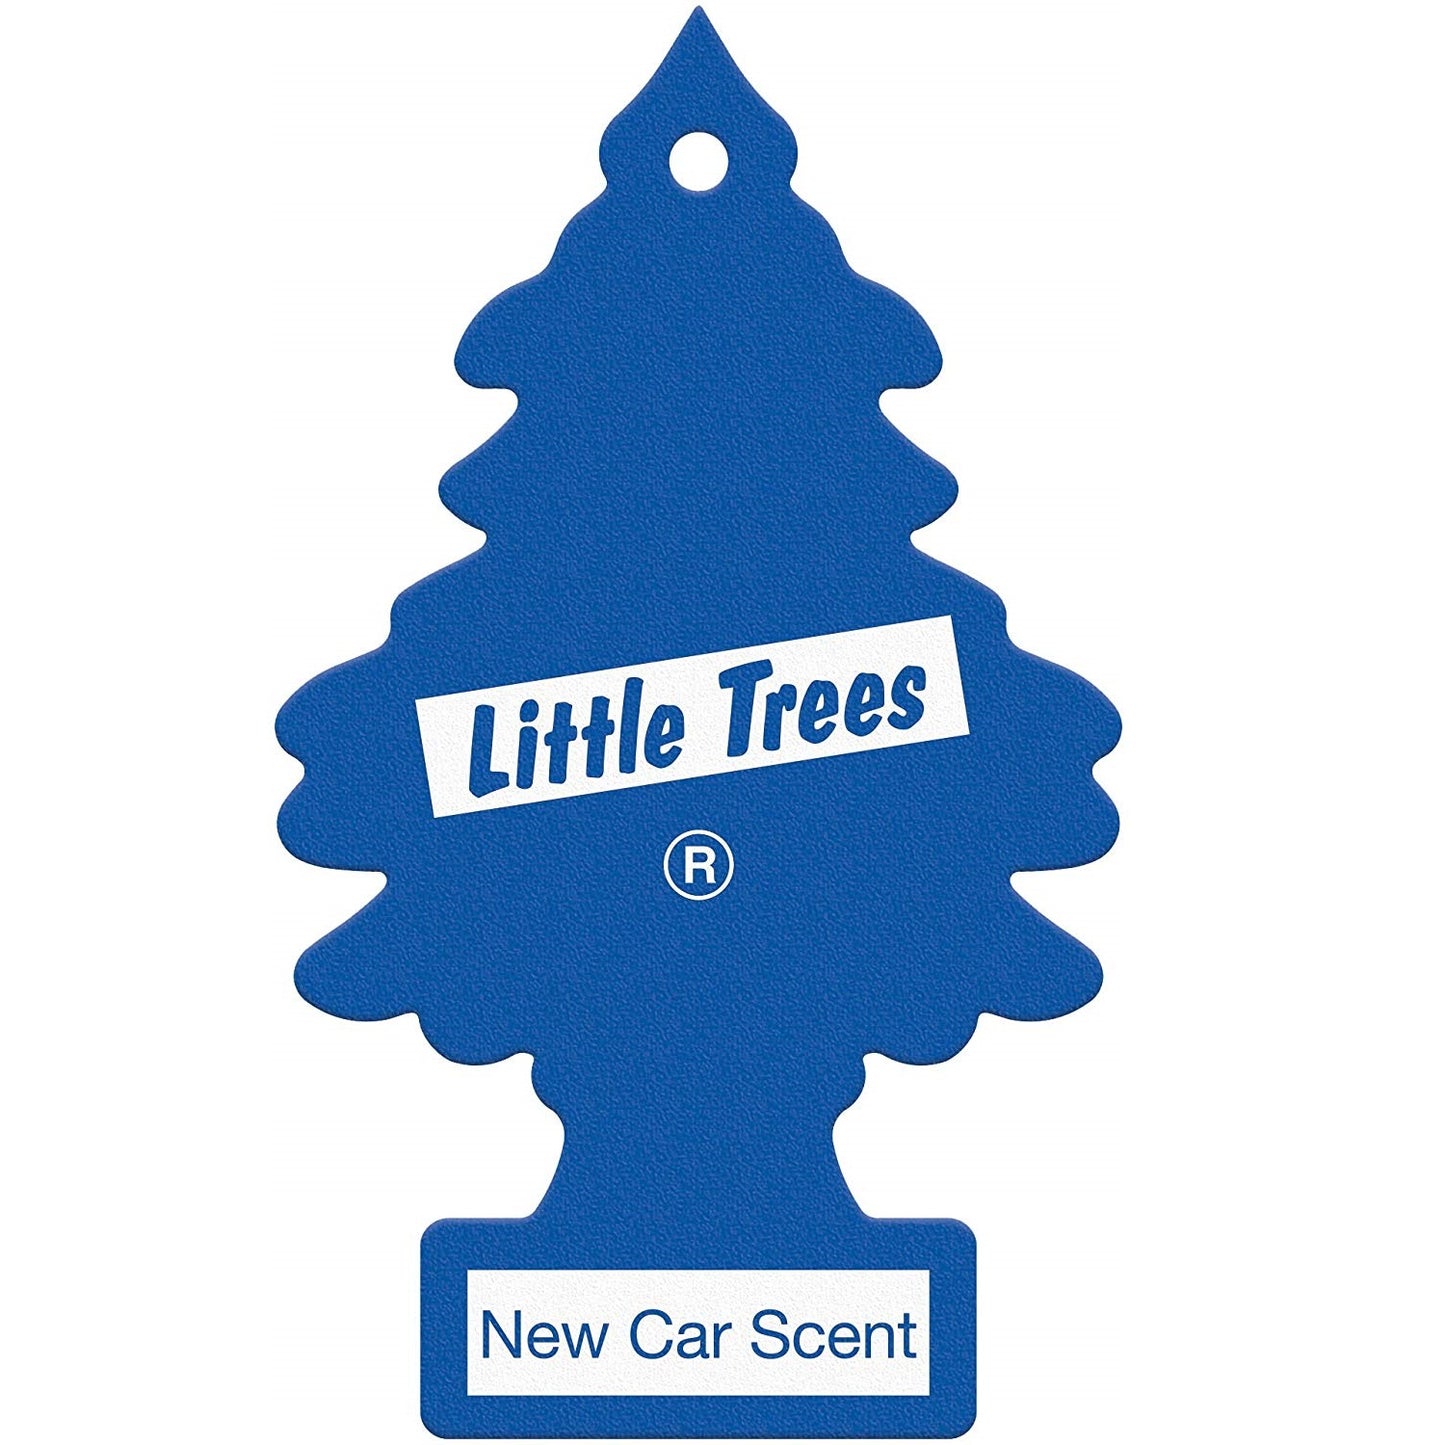 Little Trees Car Air Freshener - New Car Scent - 3 pieces